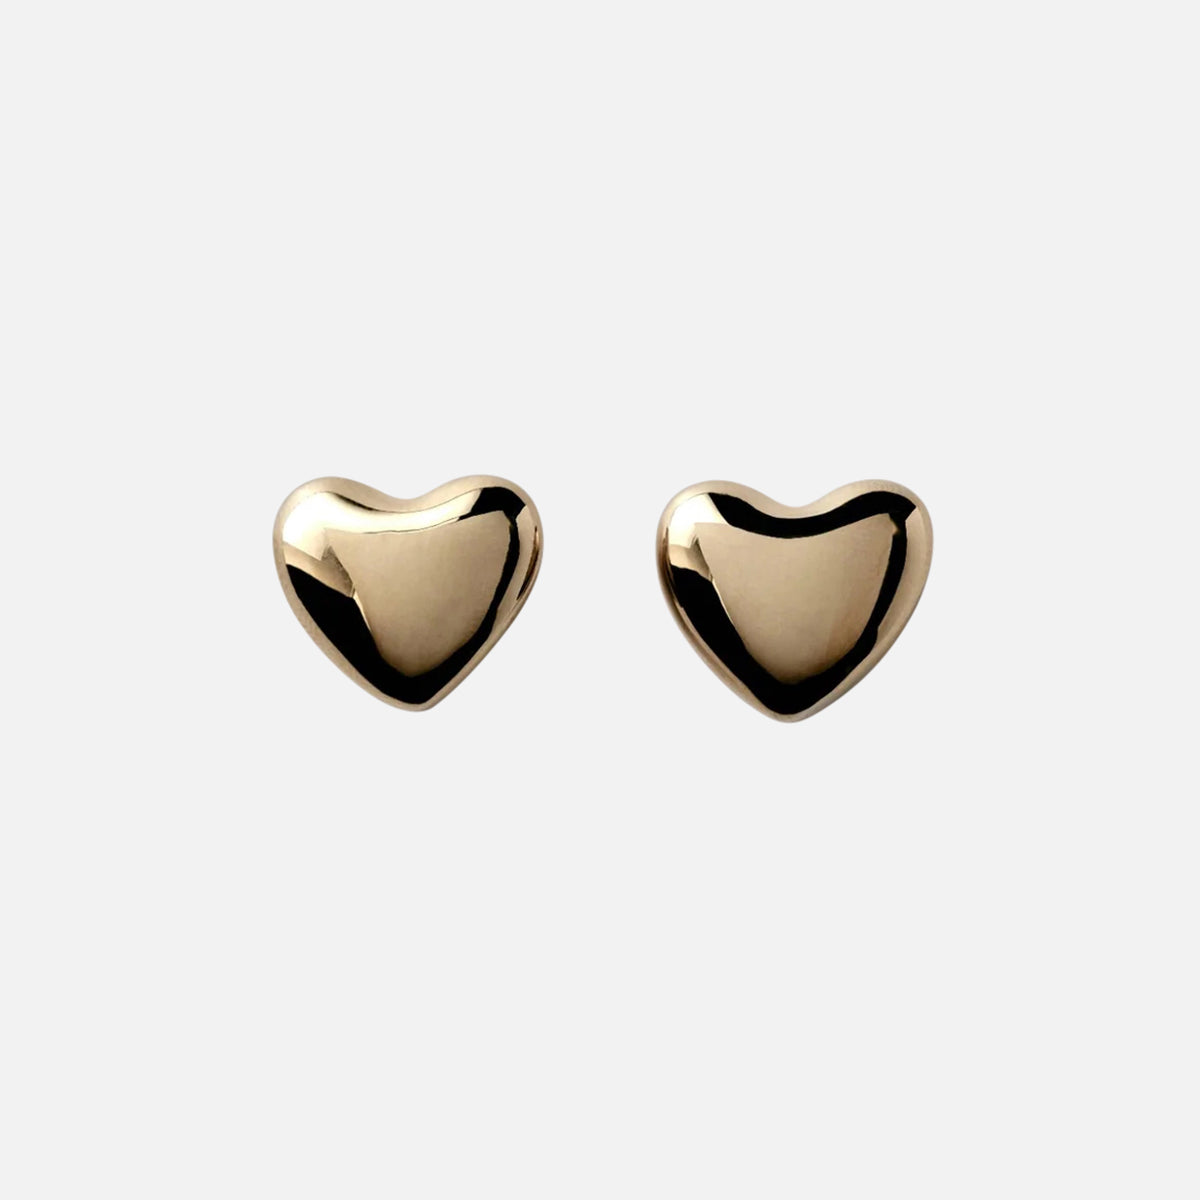 Gold Plated Voluptuous Heart Earrings, Small